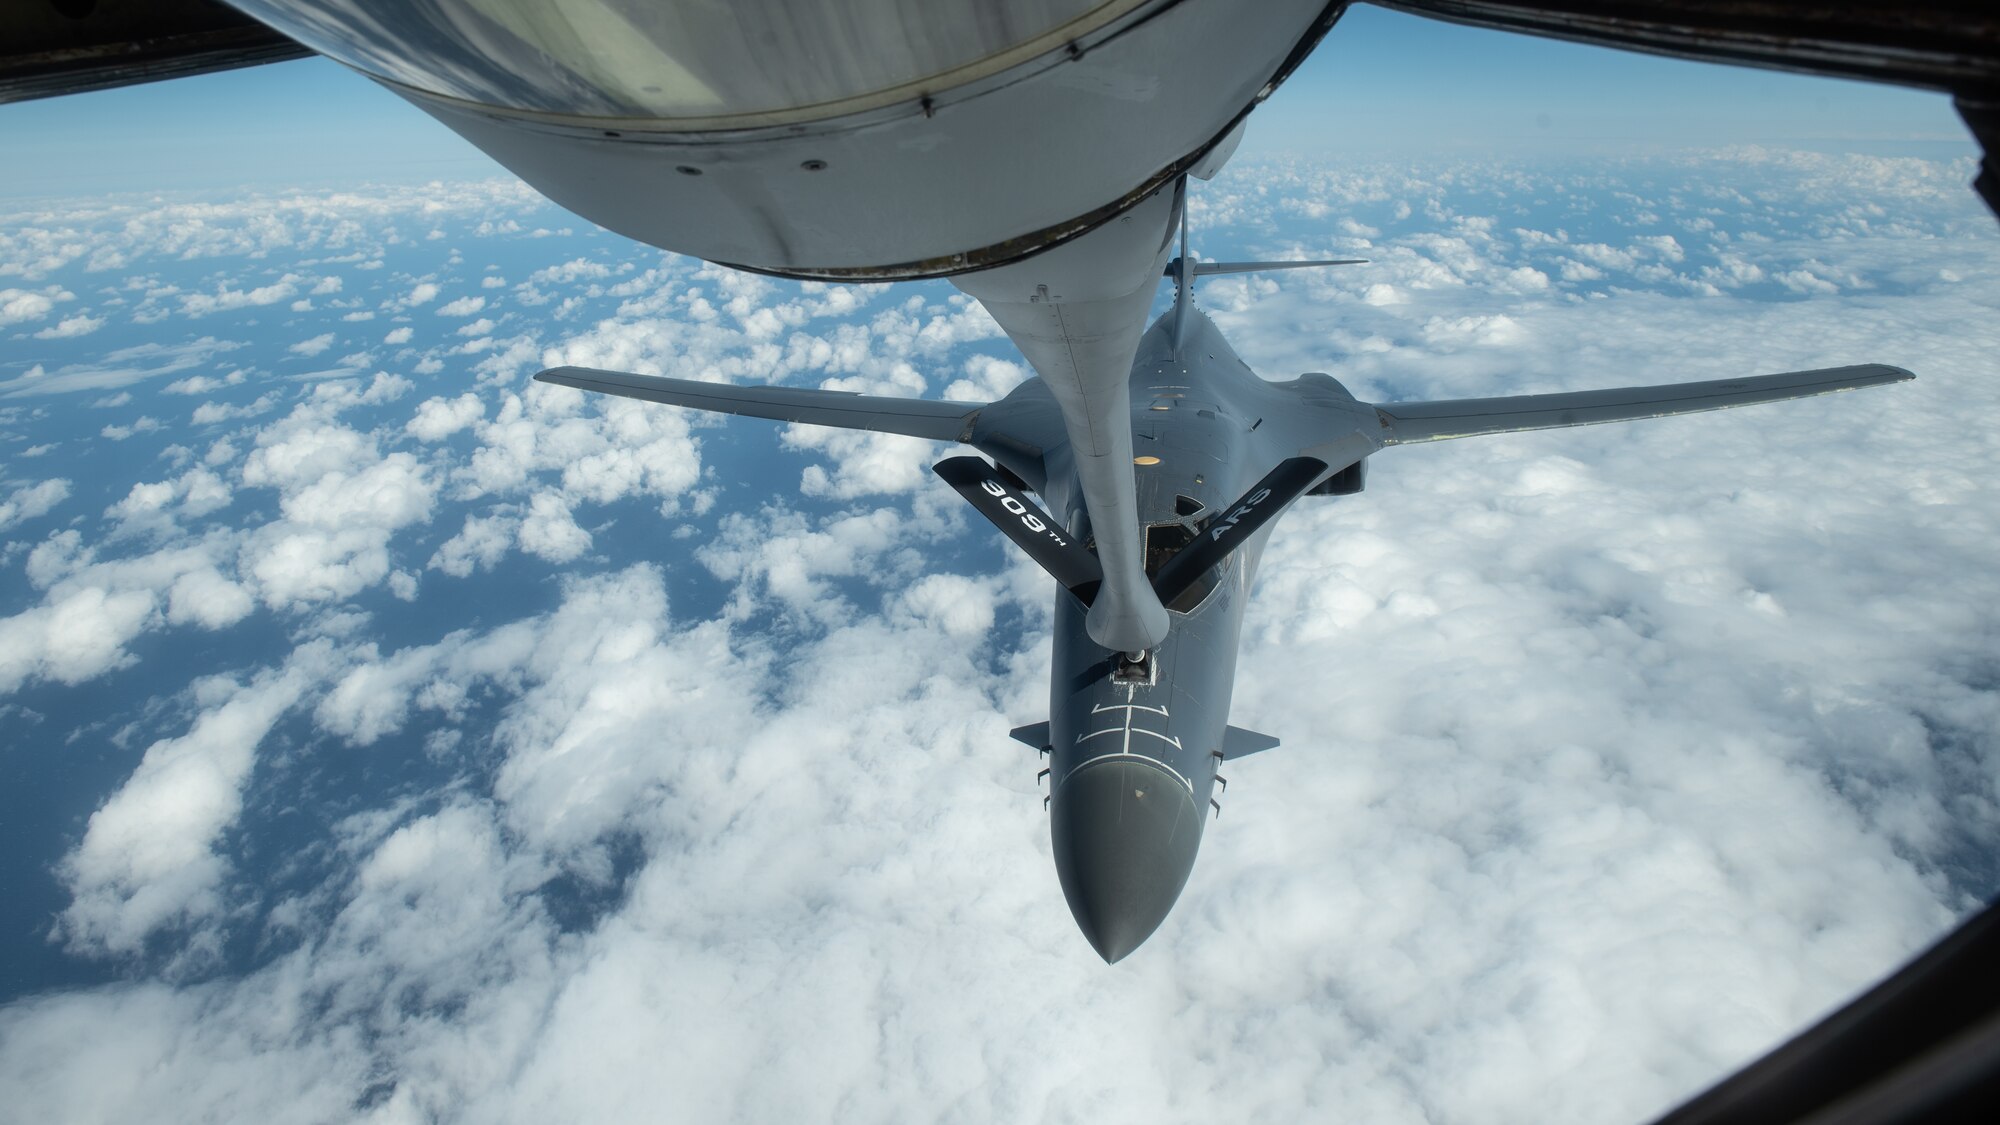 A U.S. Air Force B-1B Lancer receives fuel from a 909th Aerial Refueling Squadron KC-135 Stratotanker during a Bomber Task Force mission, Nov. 13, 2020, over the Pacific Ocean. The B1-B Lancers are deployed as a Bomber Task Force which enables Airmen to continuously conduct operations throughout the world, maintain global stability and security, and familiarize units with joint and bilateral operations in different regions. (U.S. Air Force photo by Staff Sgt. Peter Reft)